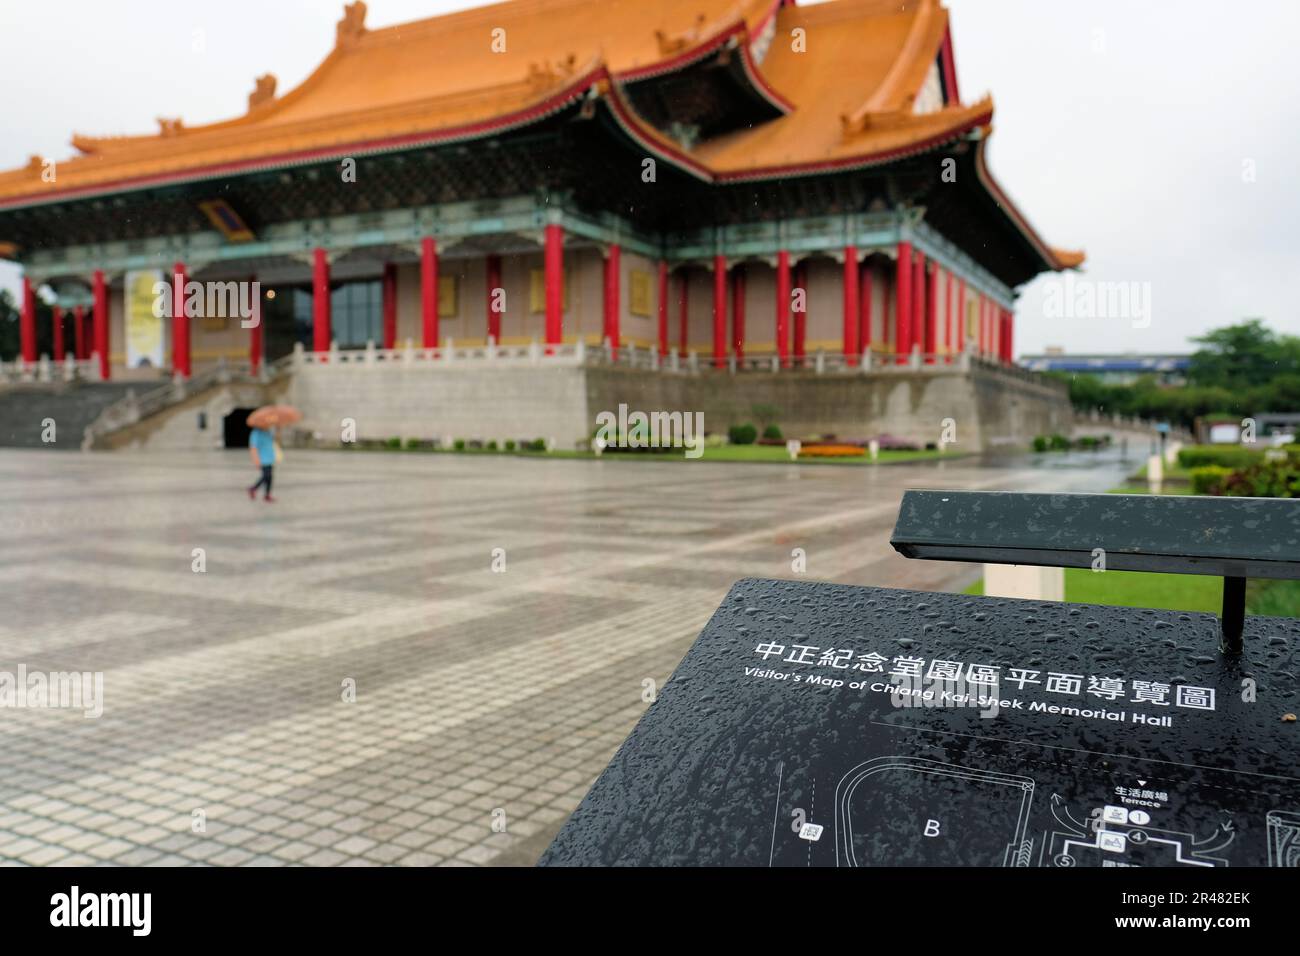 Edge of a Chiang Kai-Shek Memorial Hall visitor's map on an overcast, rainy day with rain drops; view of the National Theater Hall, Taipei, Taiwan. Stock Photo